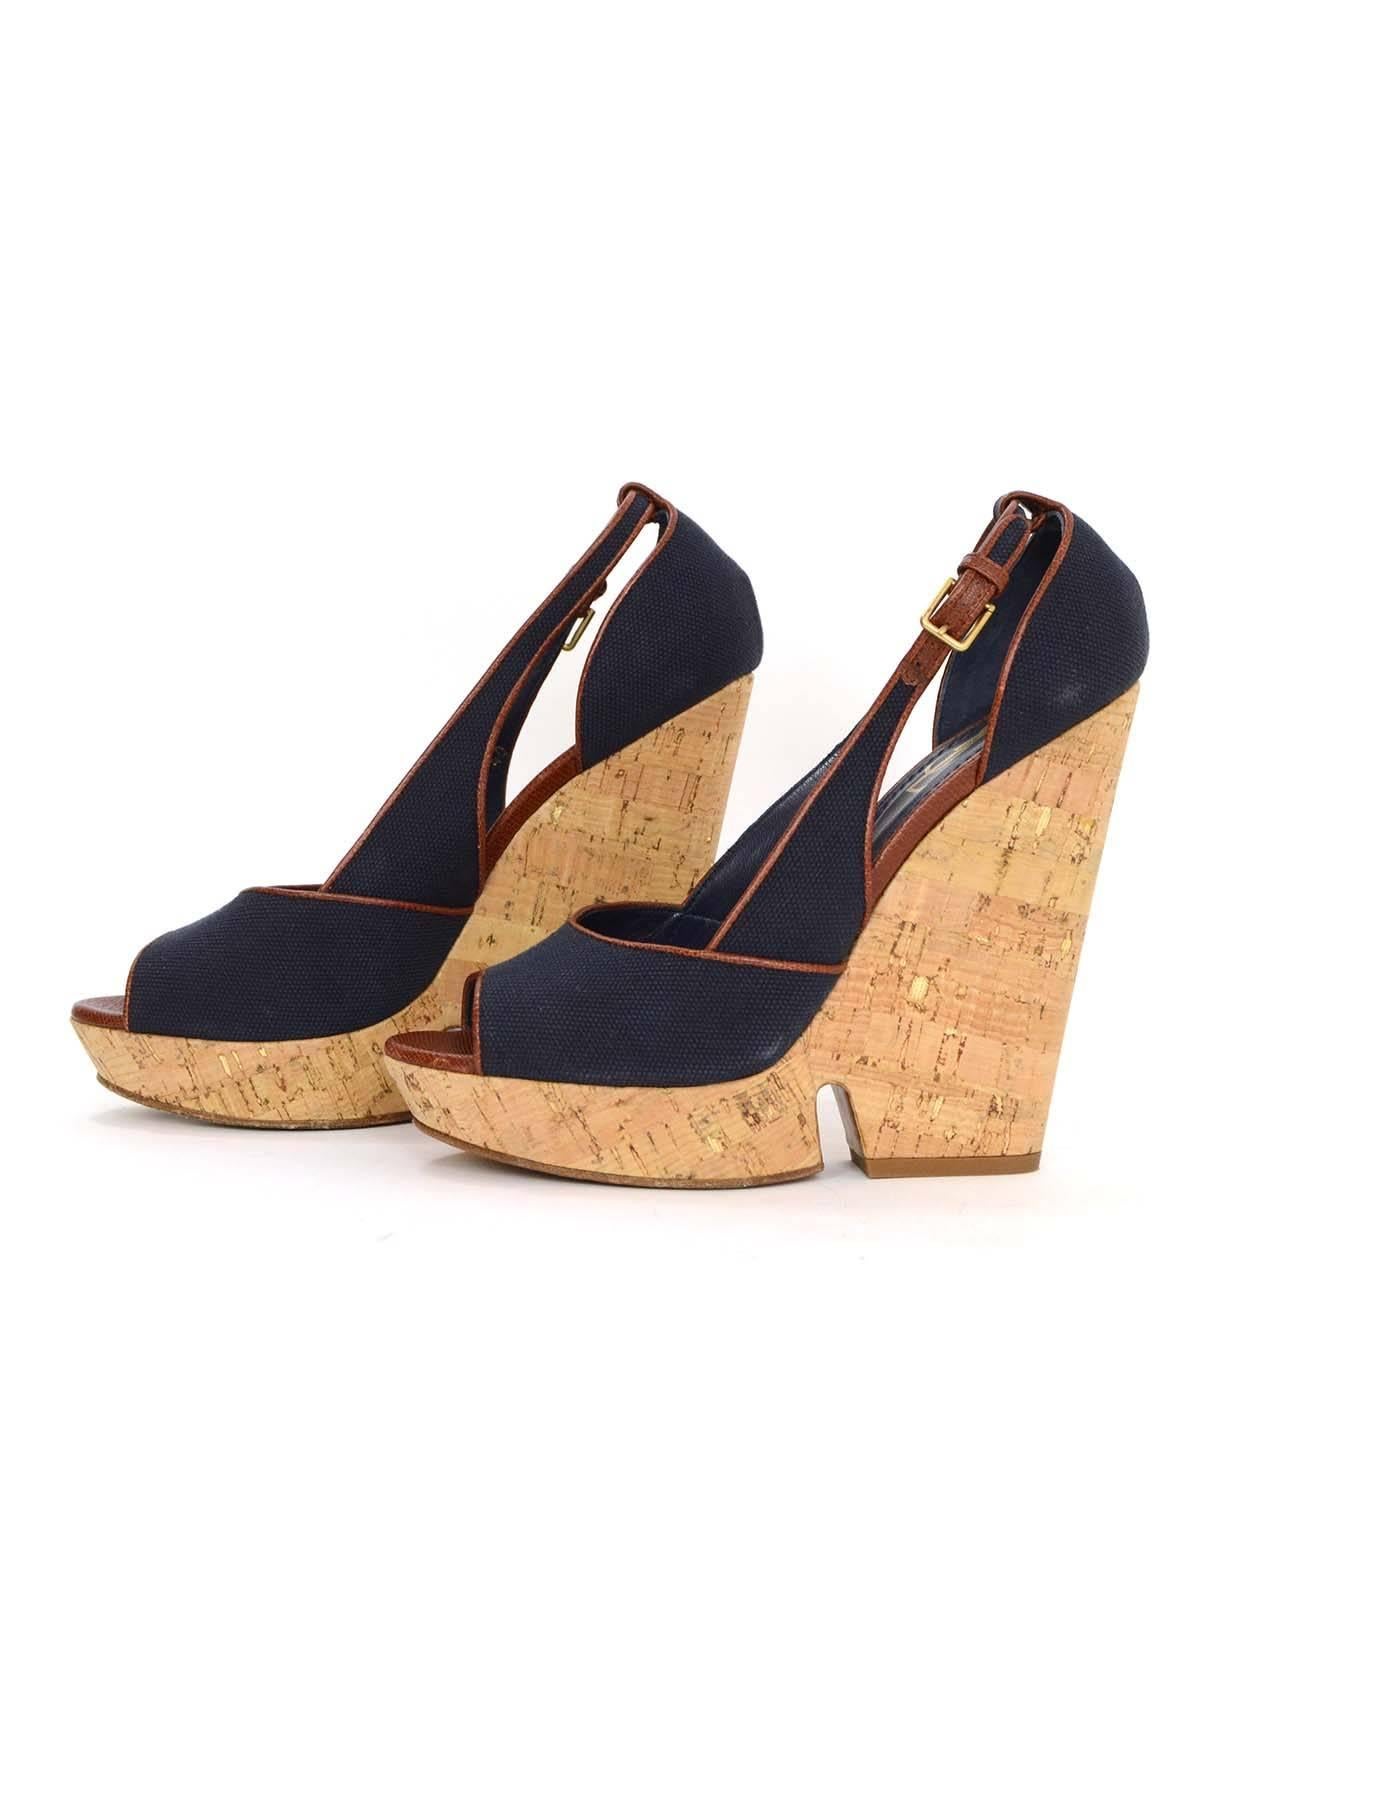 Yves Saint Laurent Navy Canvas Deauville Cork Wedges 
Features brown leather piping and trim throughout
Made In: Italy
Color: Navy and brown
Materials: Canvas, leather and cork
Closure/Opening: Outter ankle buckle strap
Sole Stamp: Yves Saint